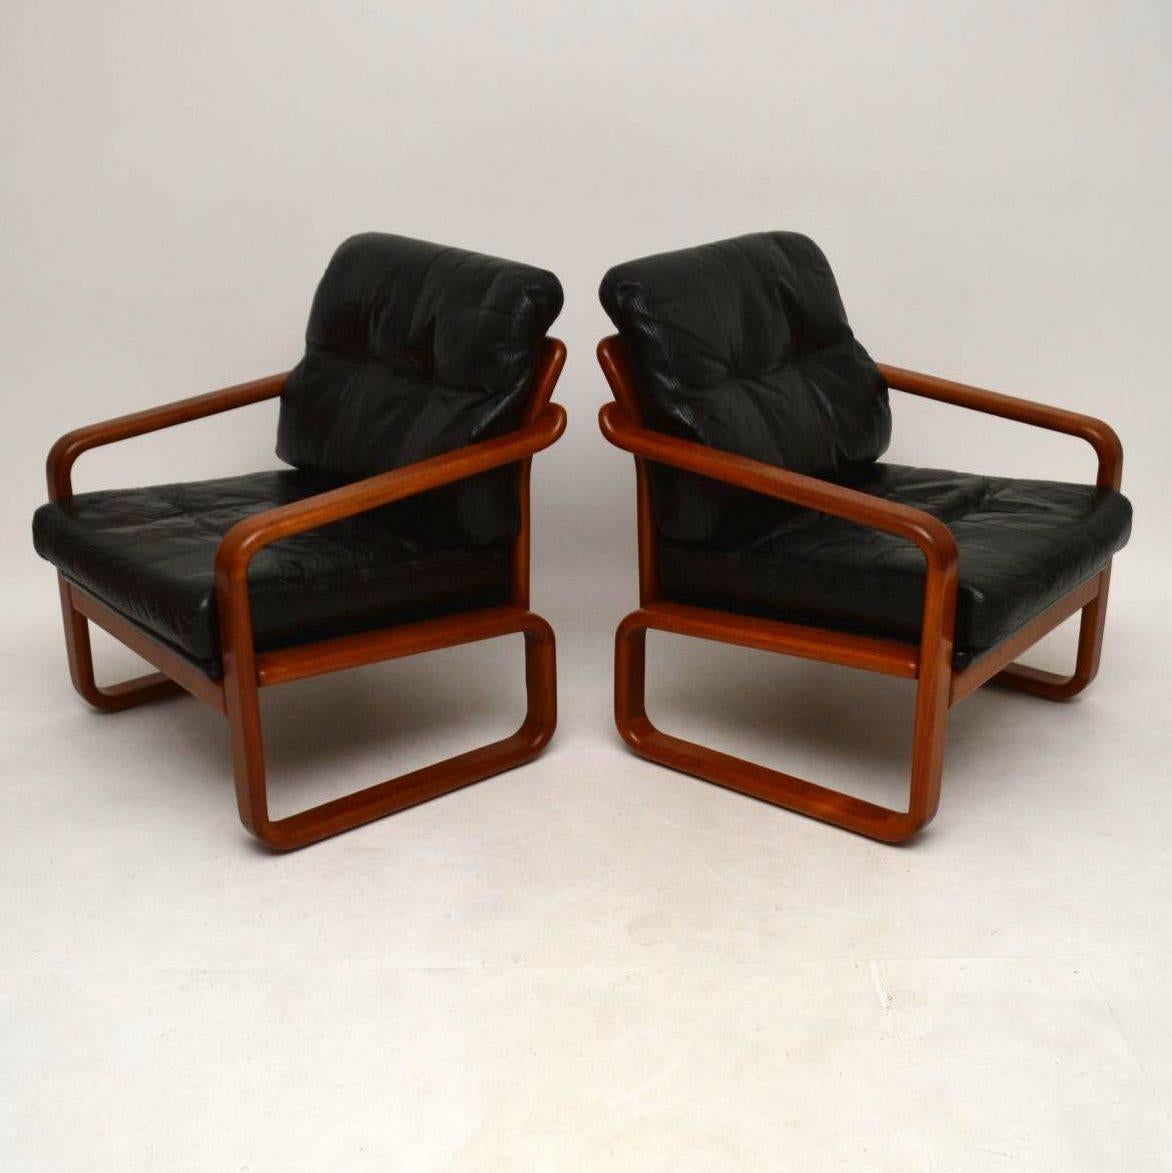 Mid-20th Century Pair of 1960s Danish Teak and Leather Armchairs